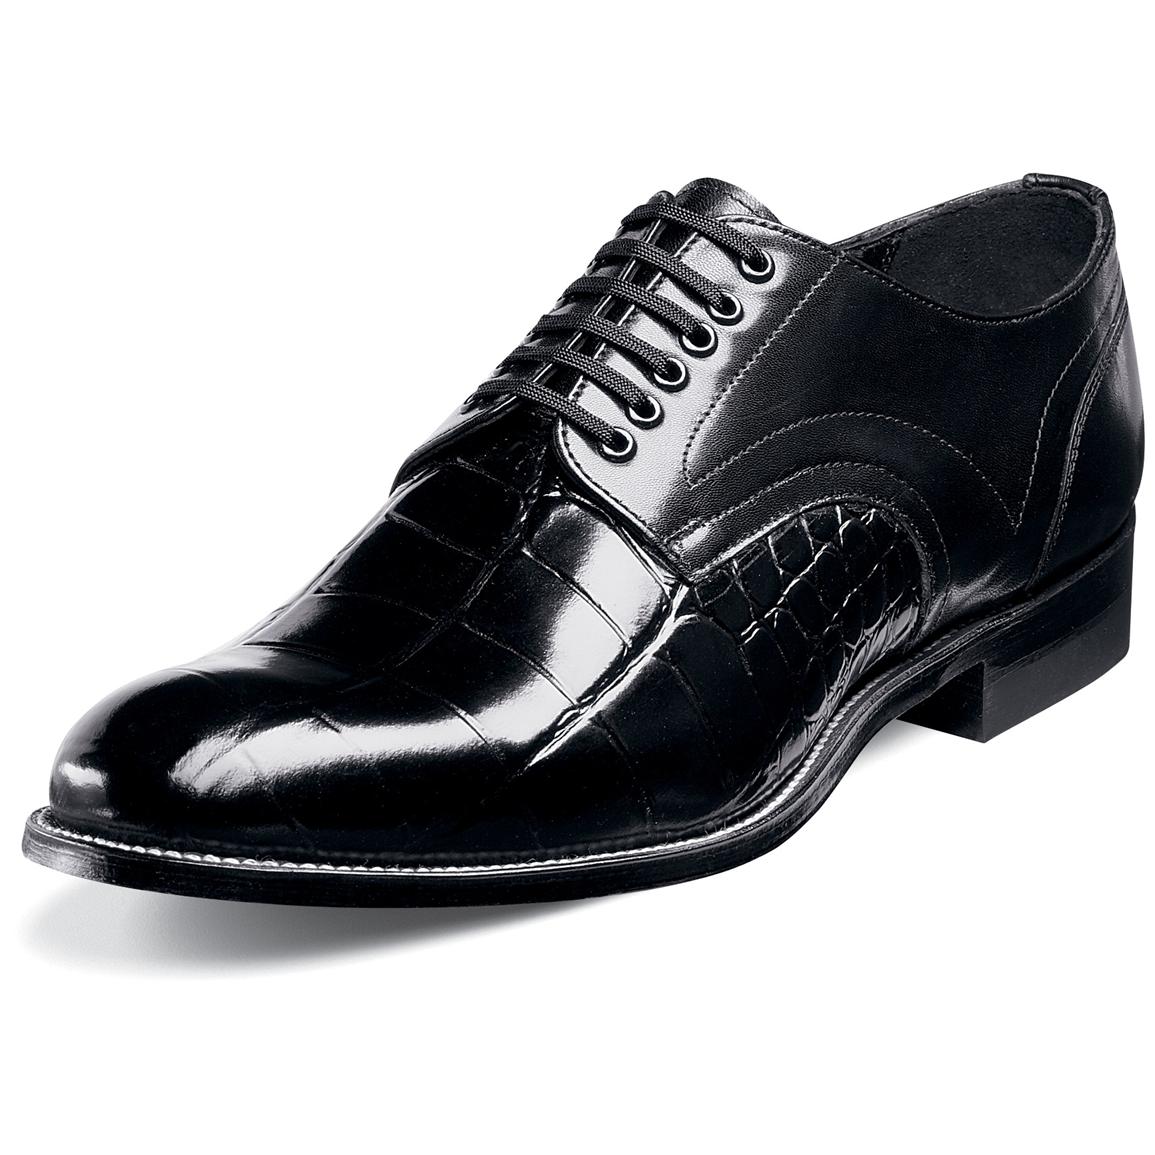 Men's Stacy Adams® Madison Dress Shoes - 207426, Dress Shoes at ...